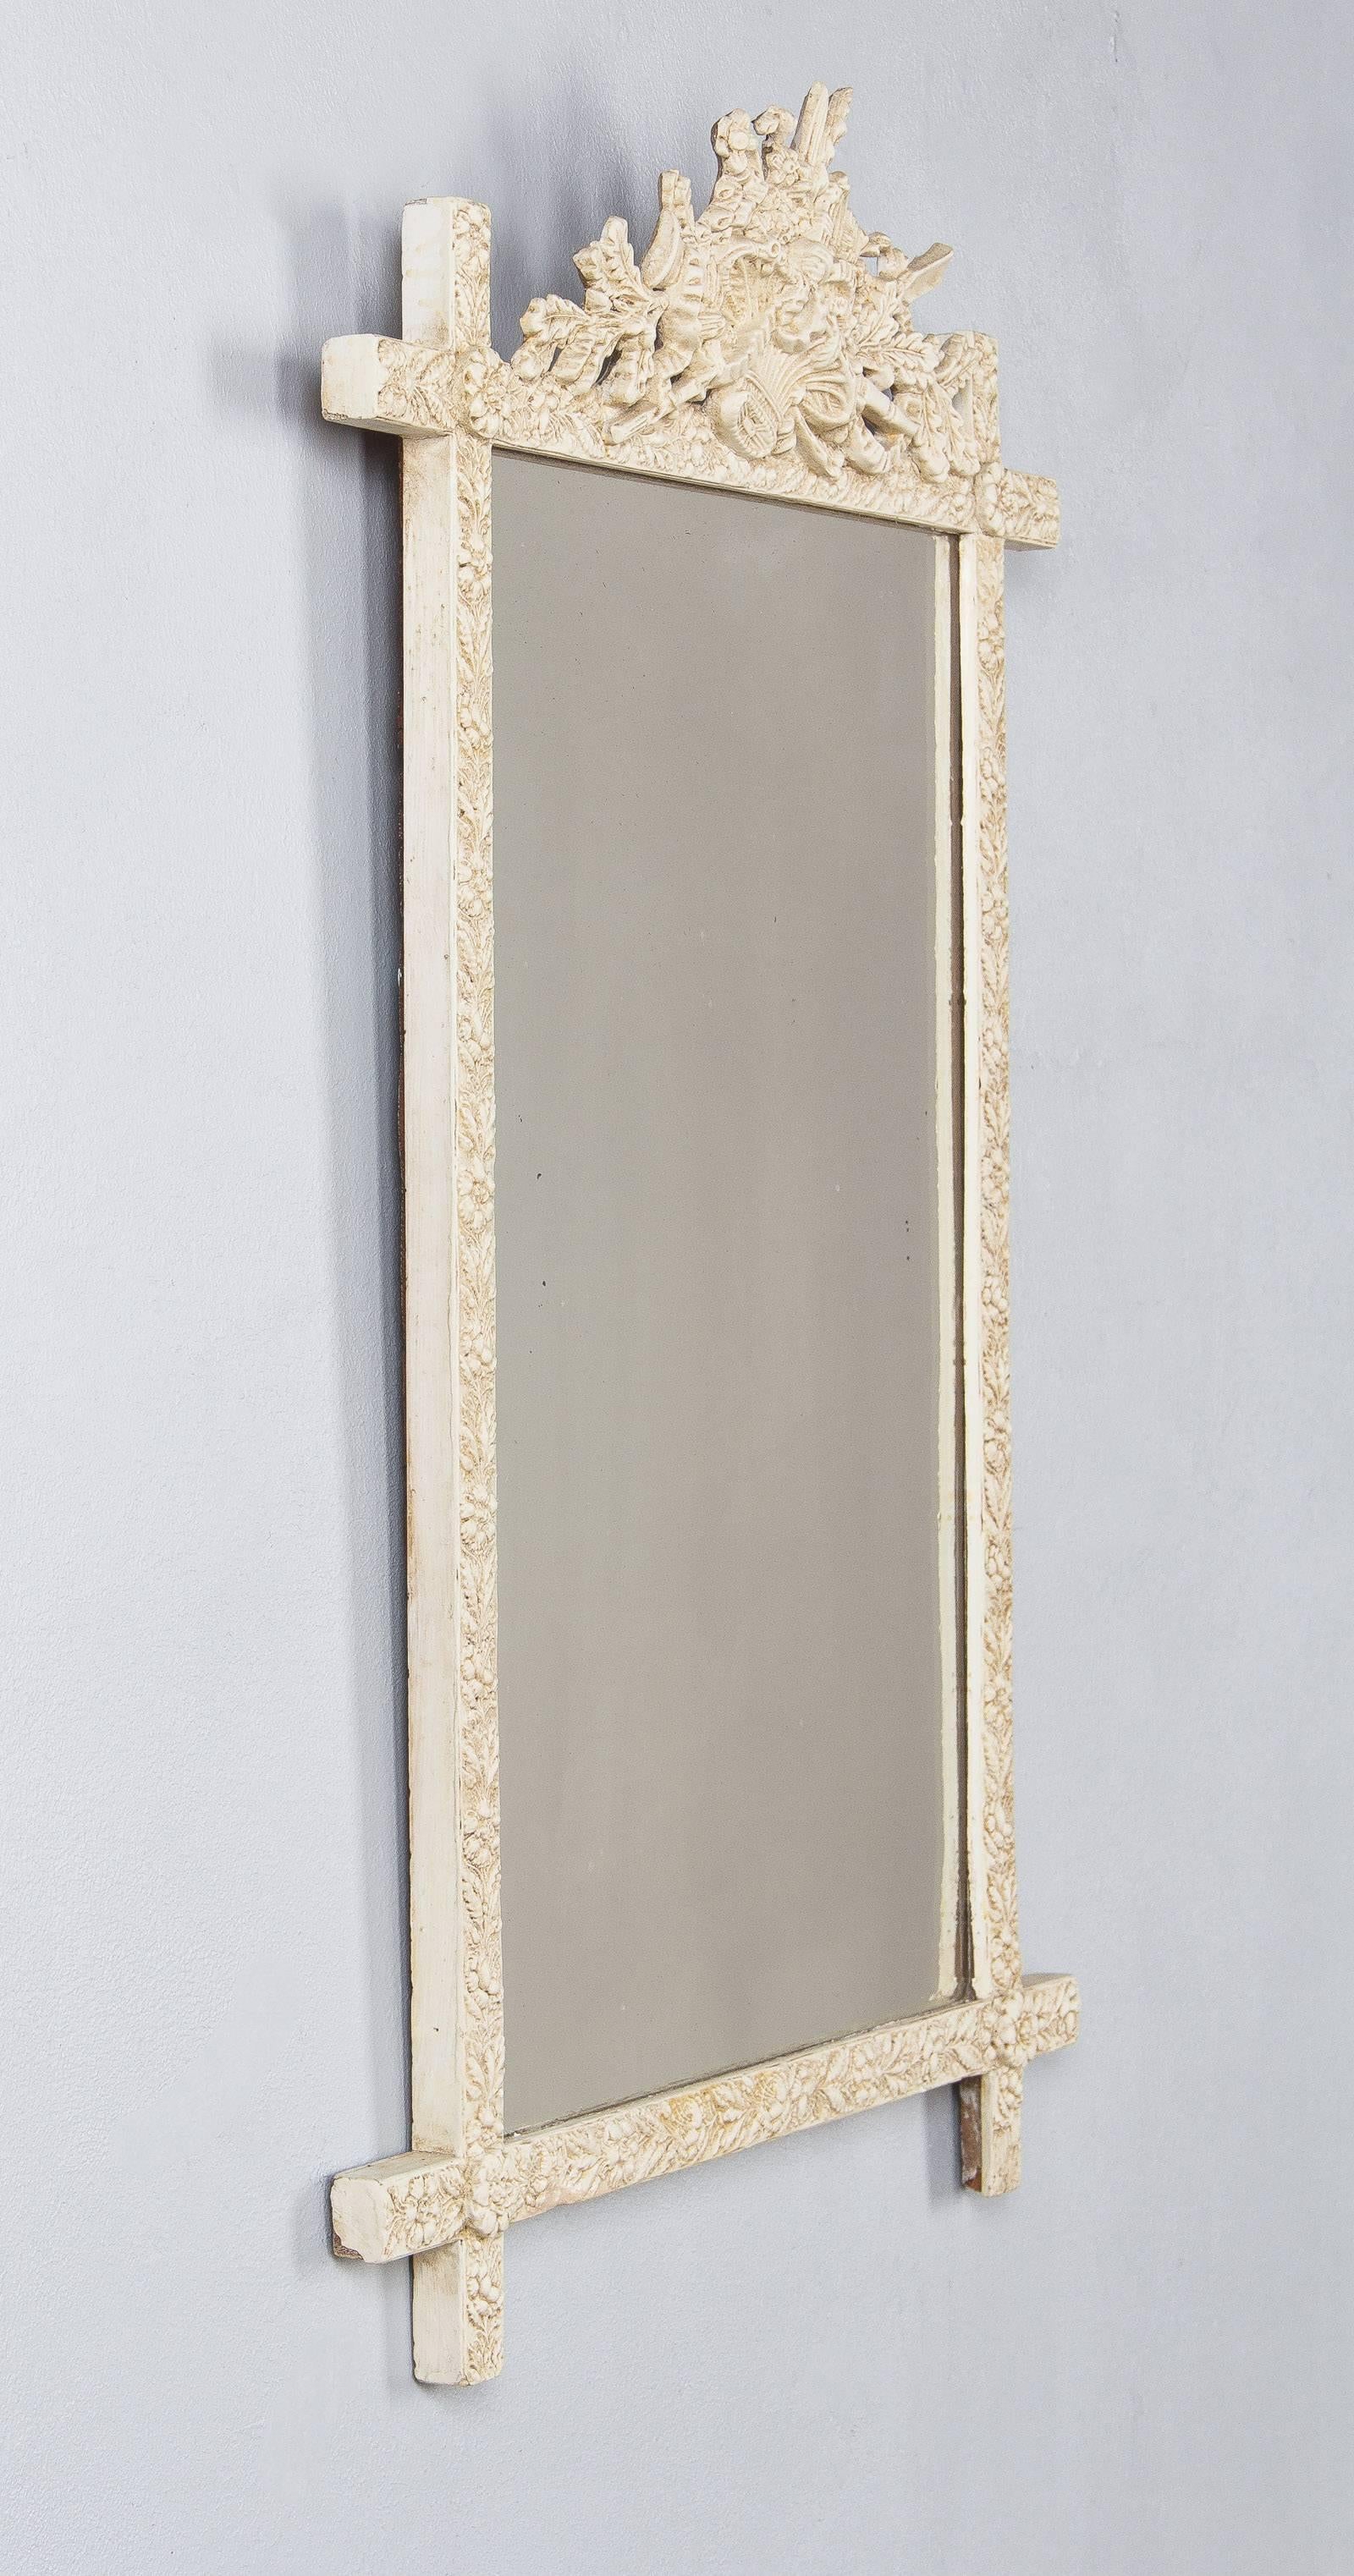 French Louis XVI Style Painted Mirror, Late 1800s (Spiegel)